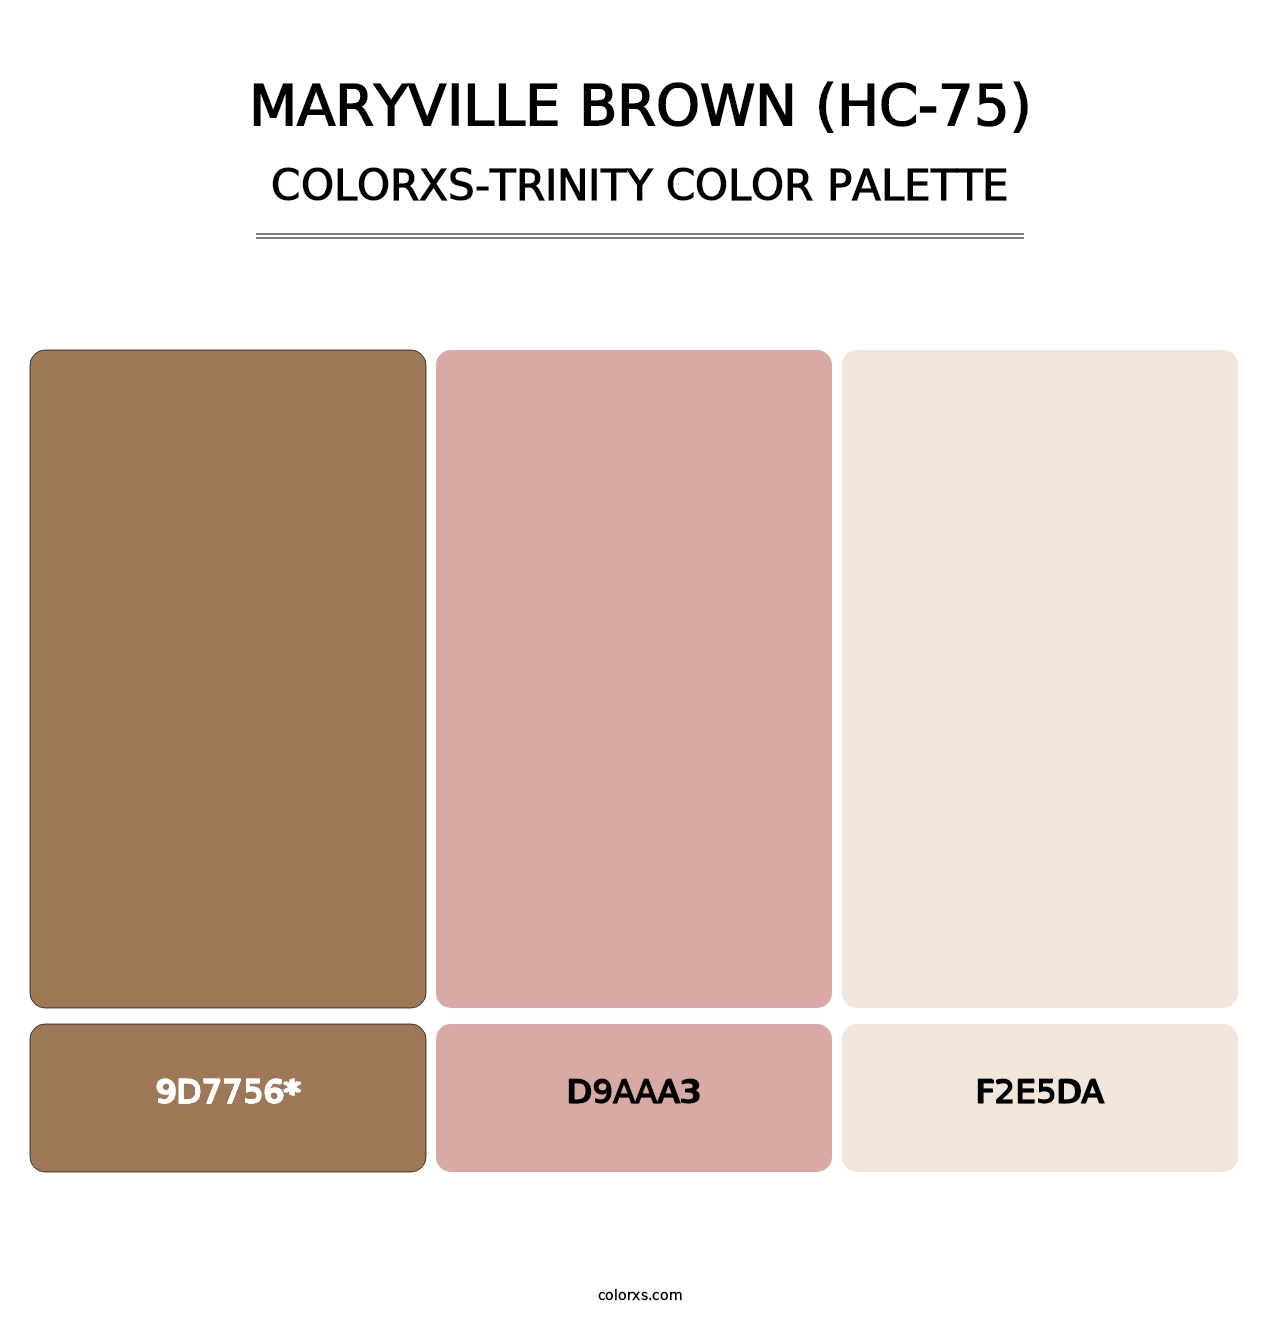 Maryville Brown (HC-75) - Colorxs Trinity Palette